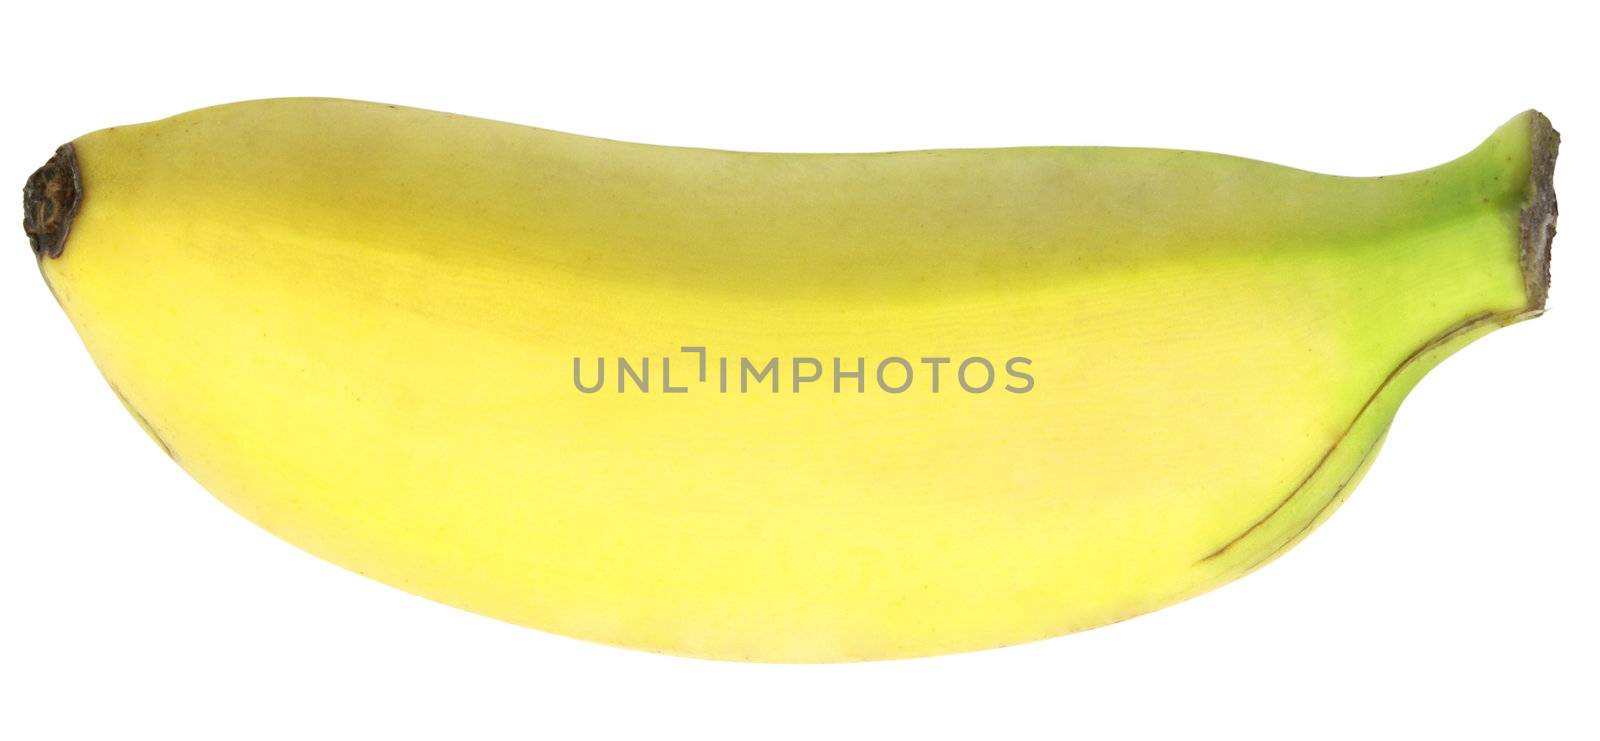 Fresh yellow banana isolated over white with clipping path